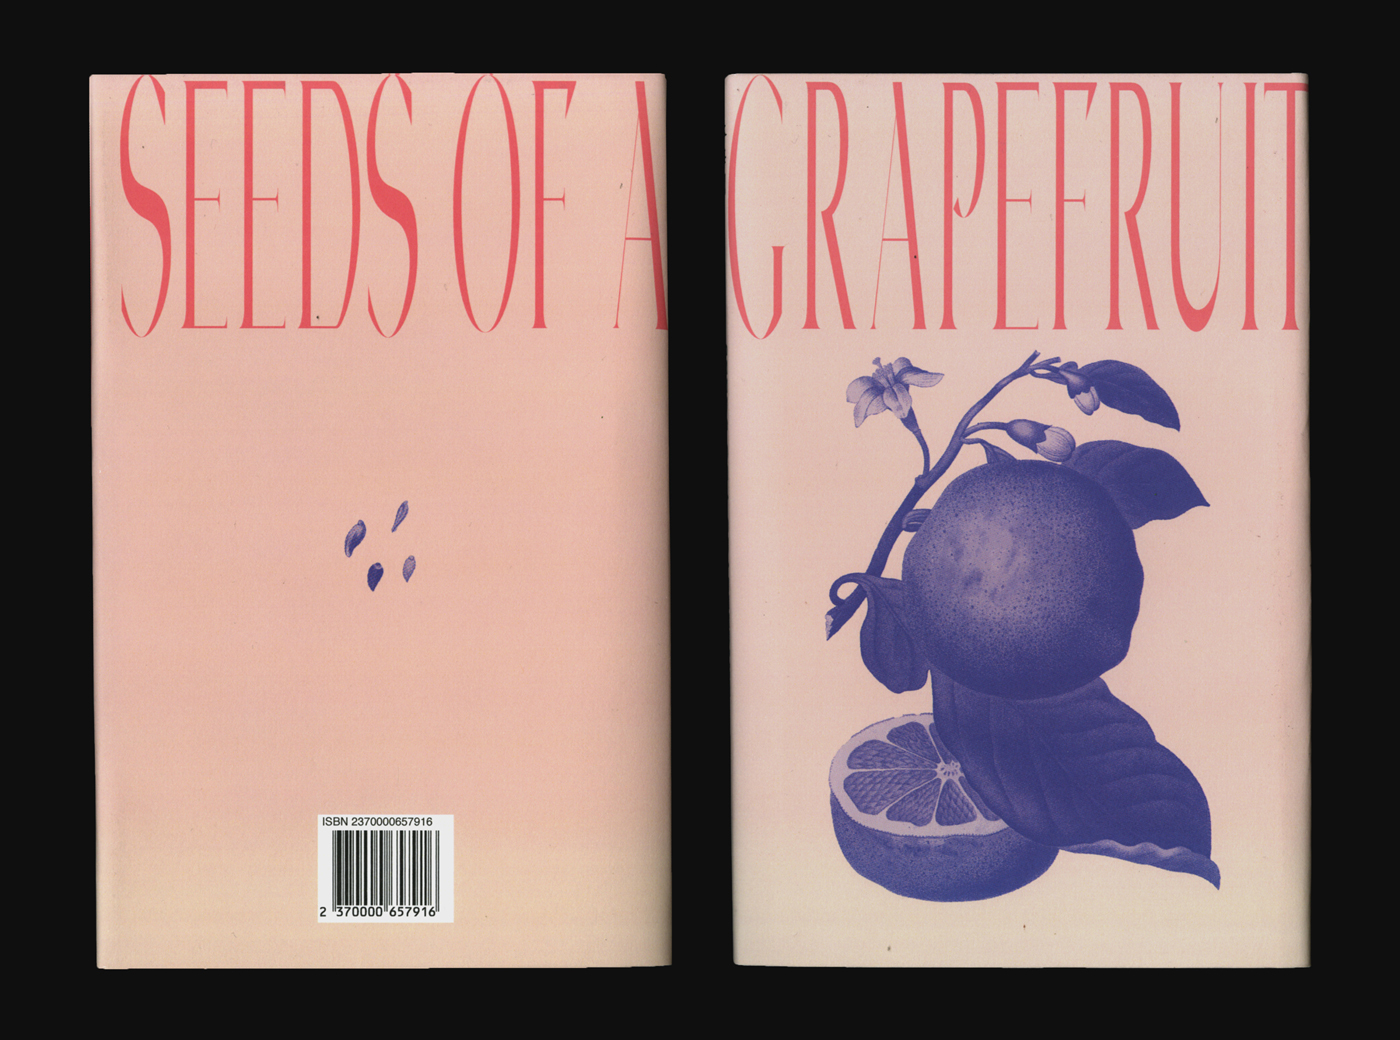 Front and back cover of a book titled "Seeds of a Grapefruit." There is an image of a grapefruit.